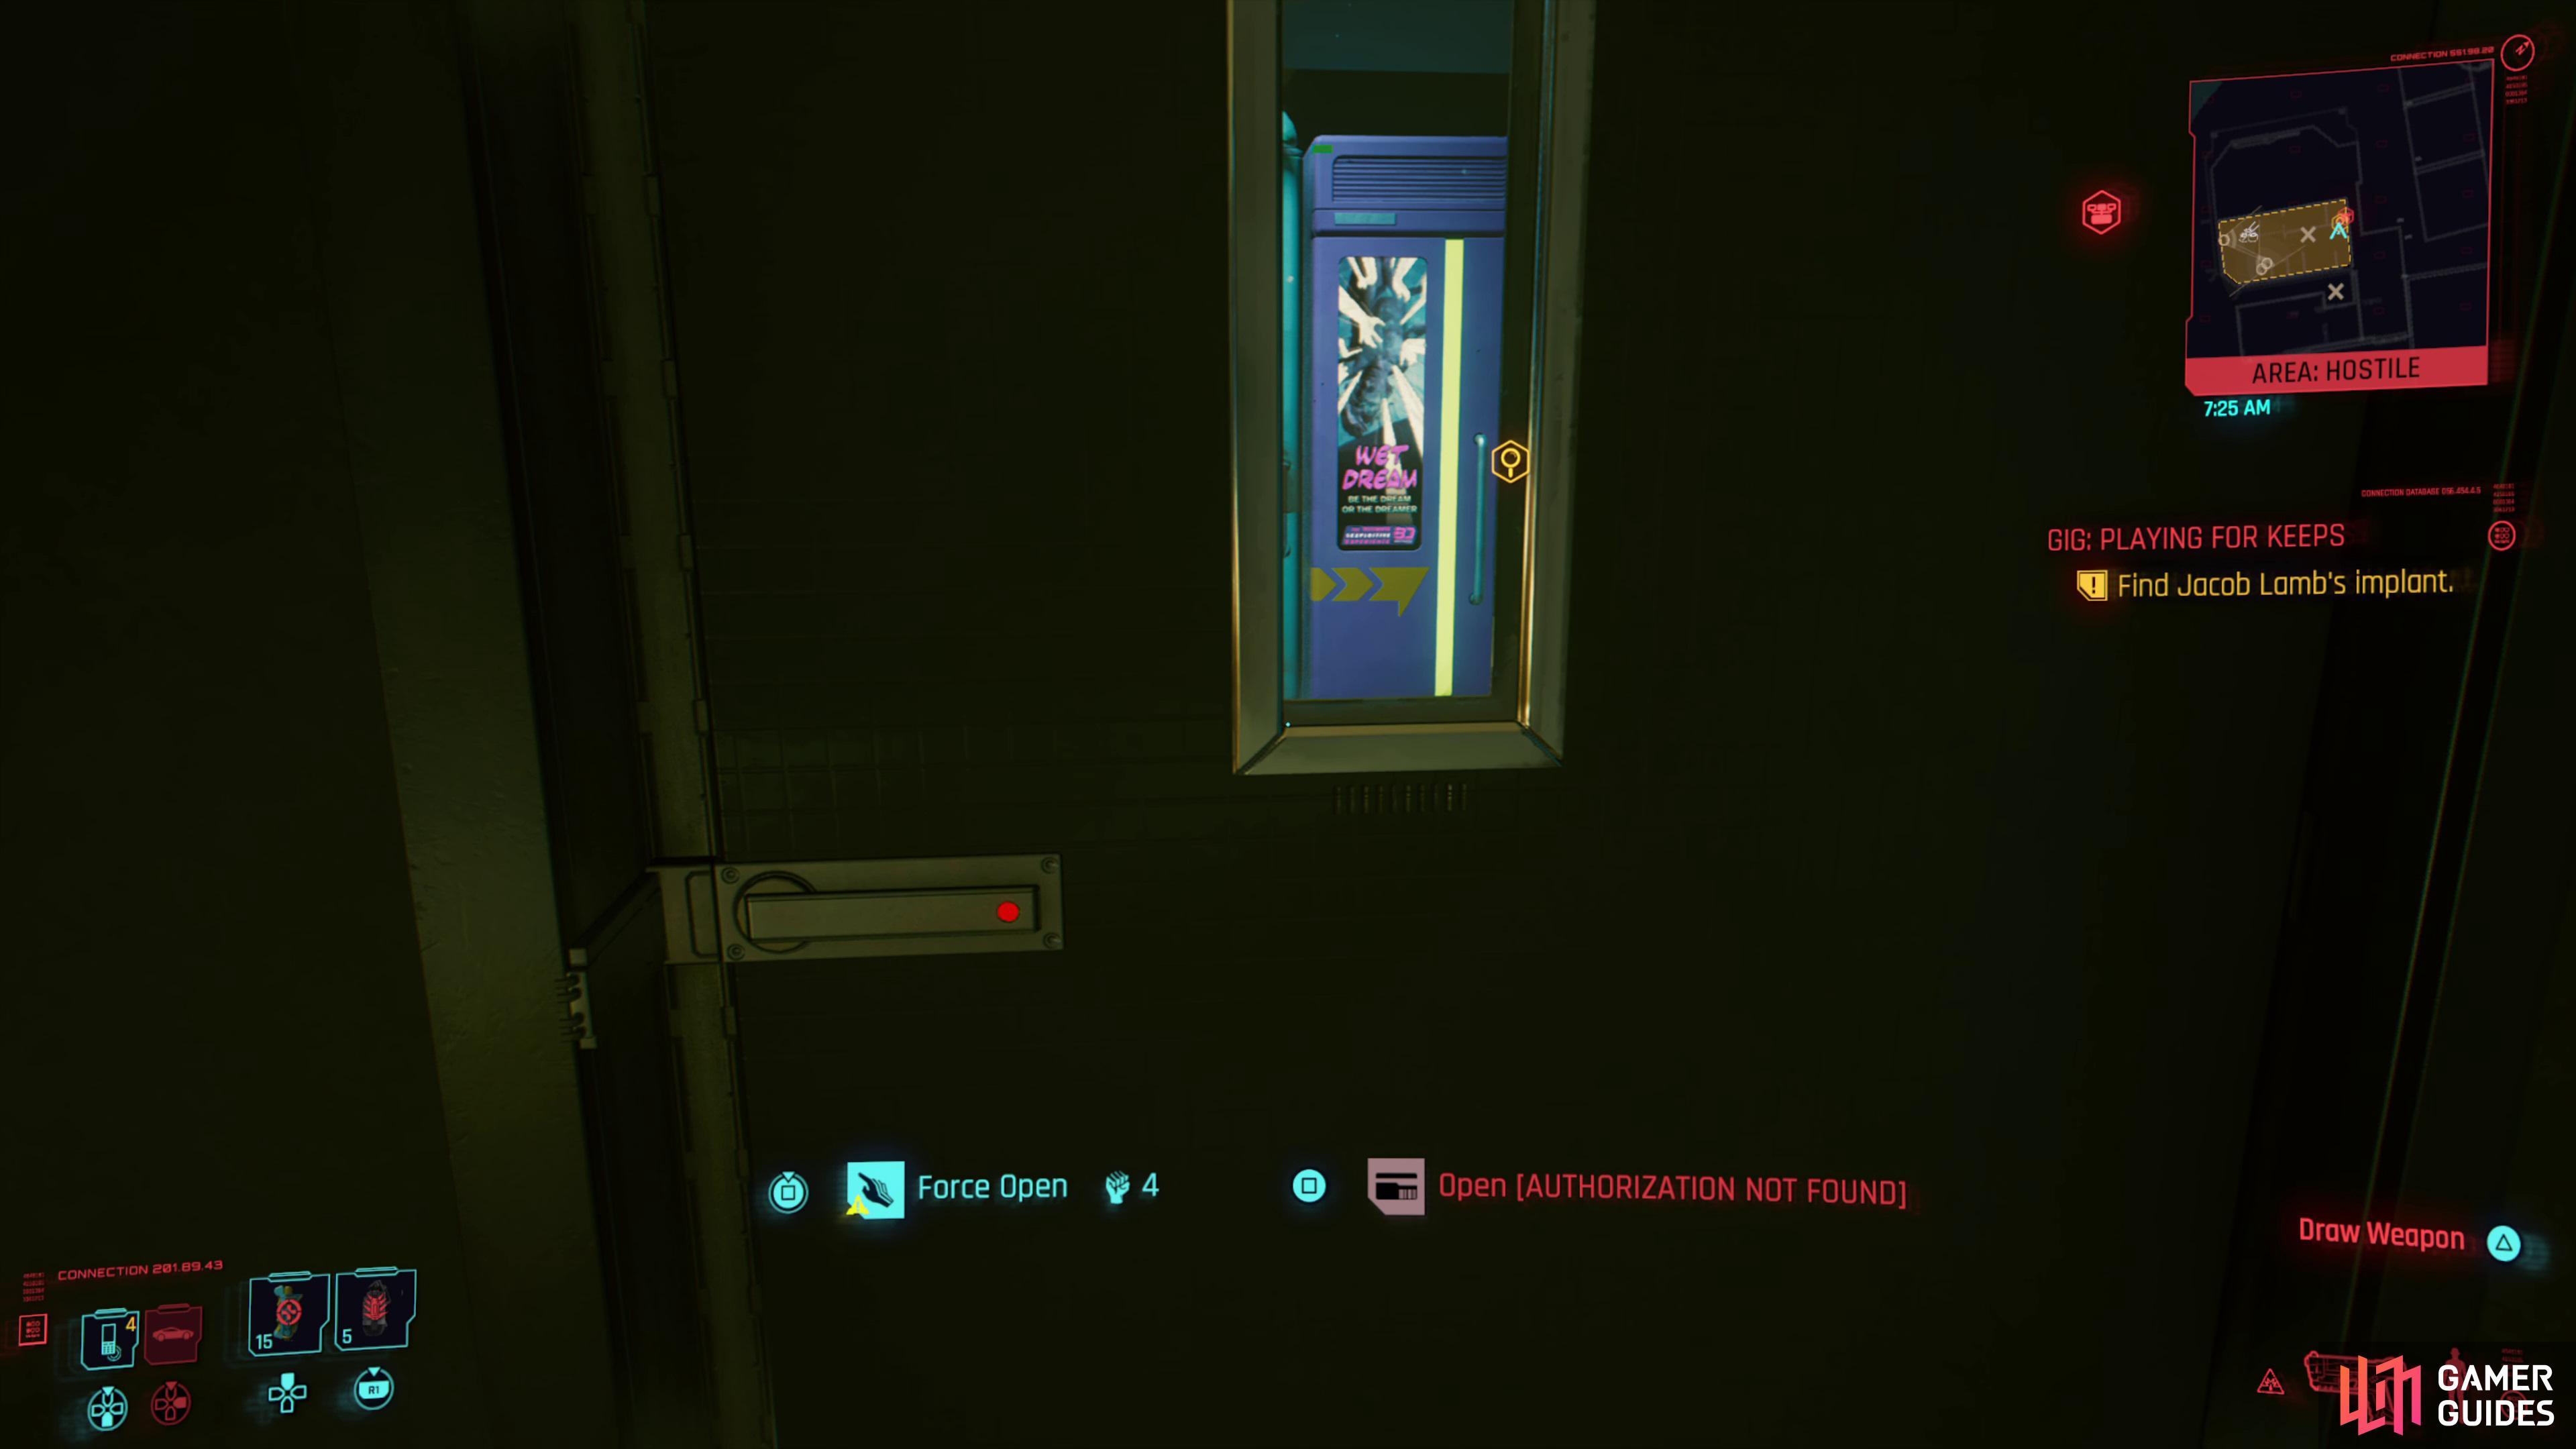 You could acquire the eye through forcing the door open with the body stat at level 4